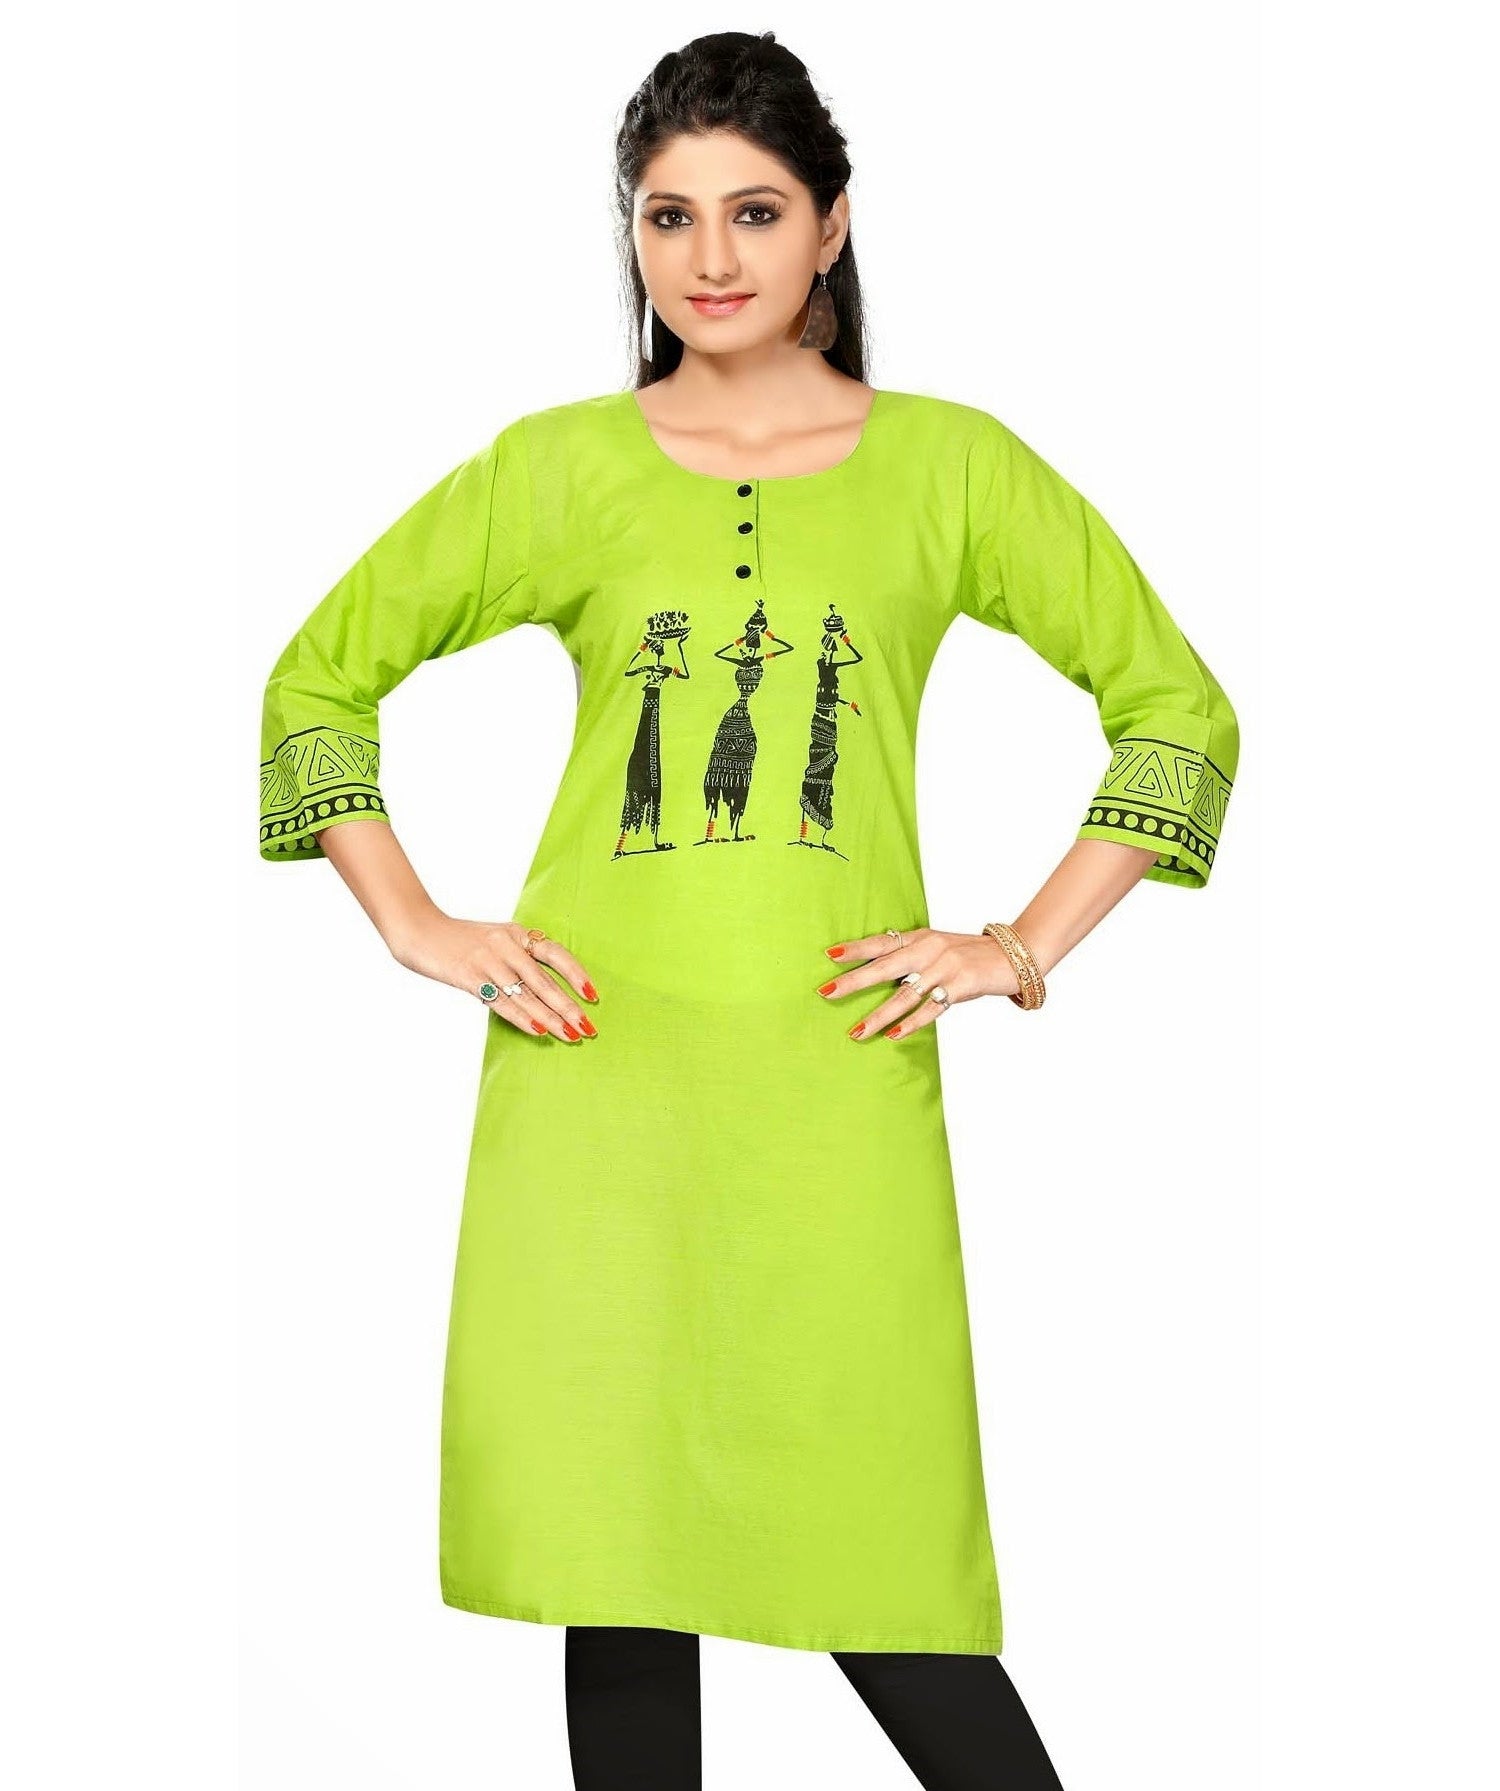 Neon Green Cotton 3/4th Sleeves kurti with beautiful print on the sleeves - Boutique4India Inc.